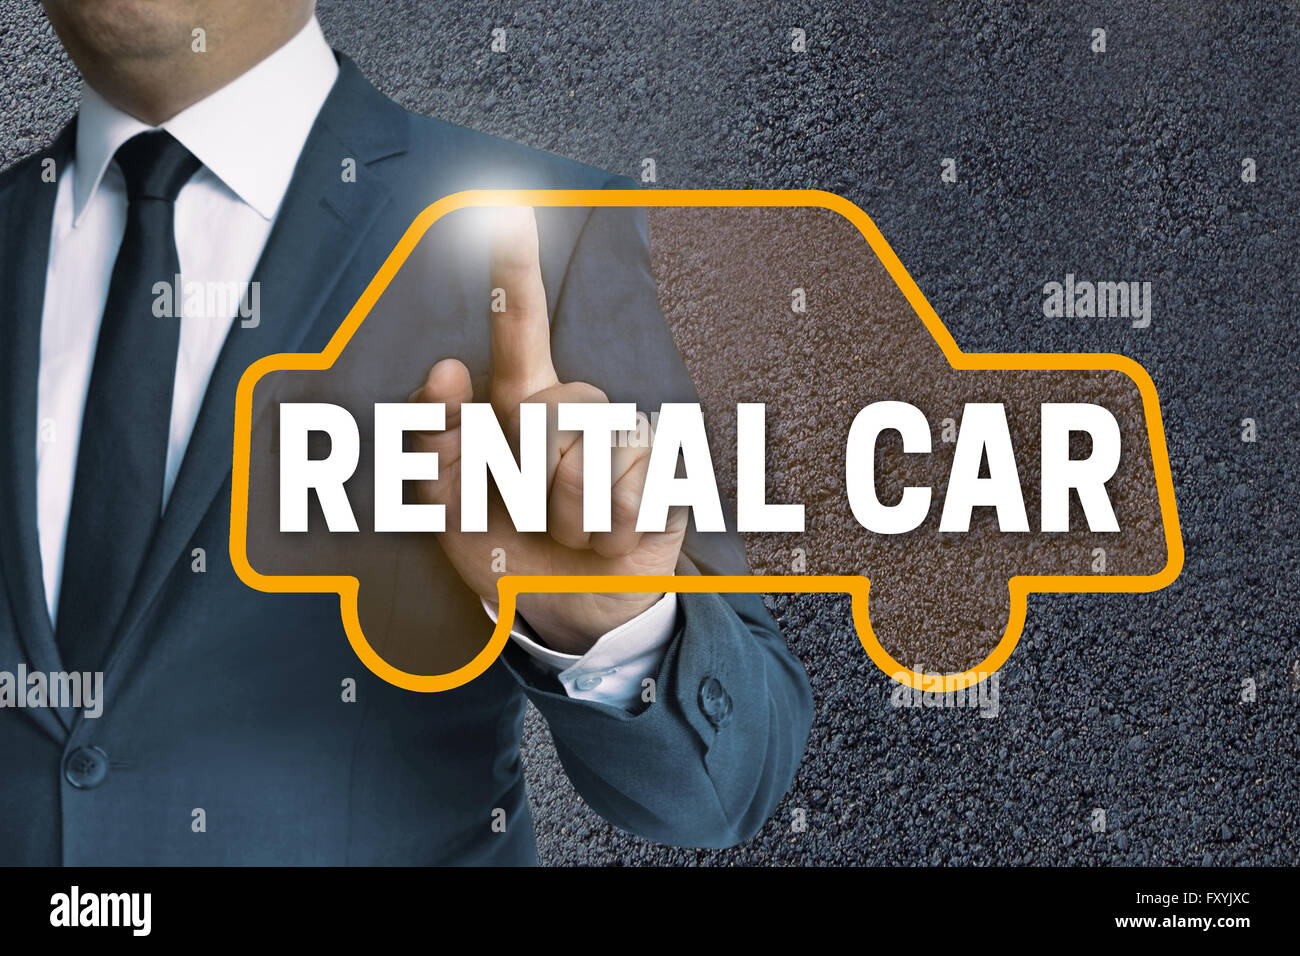 rental car car touchscreen is operated by businessman concept. Stock Photo